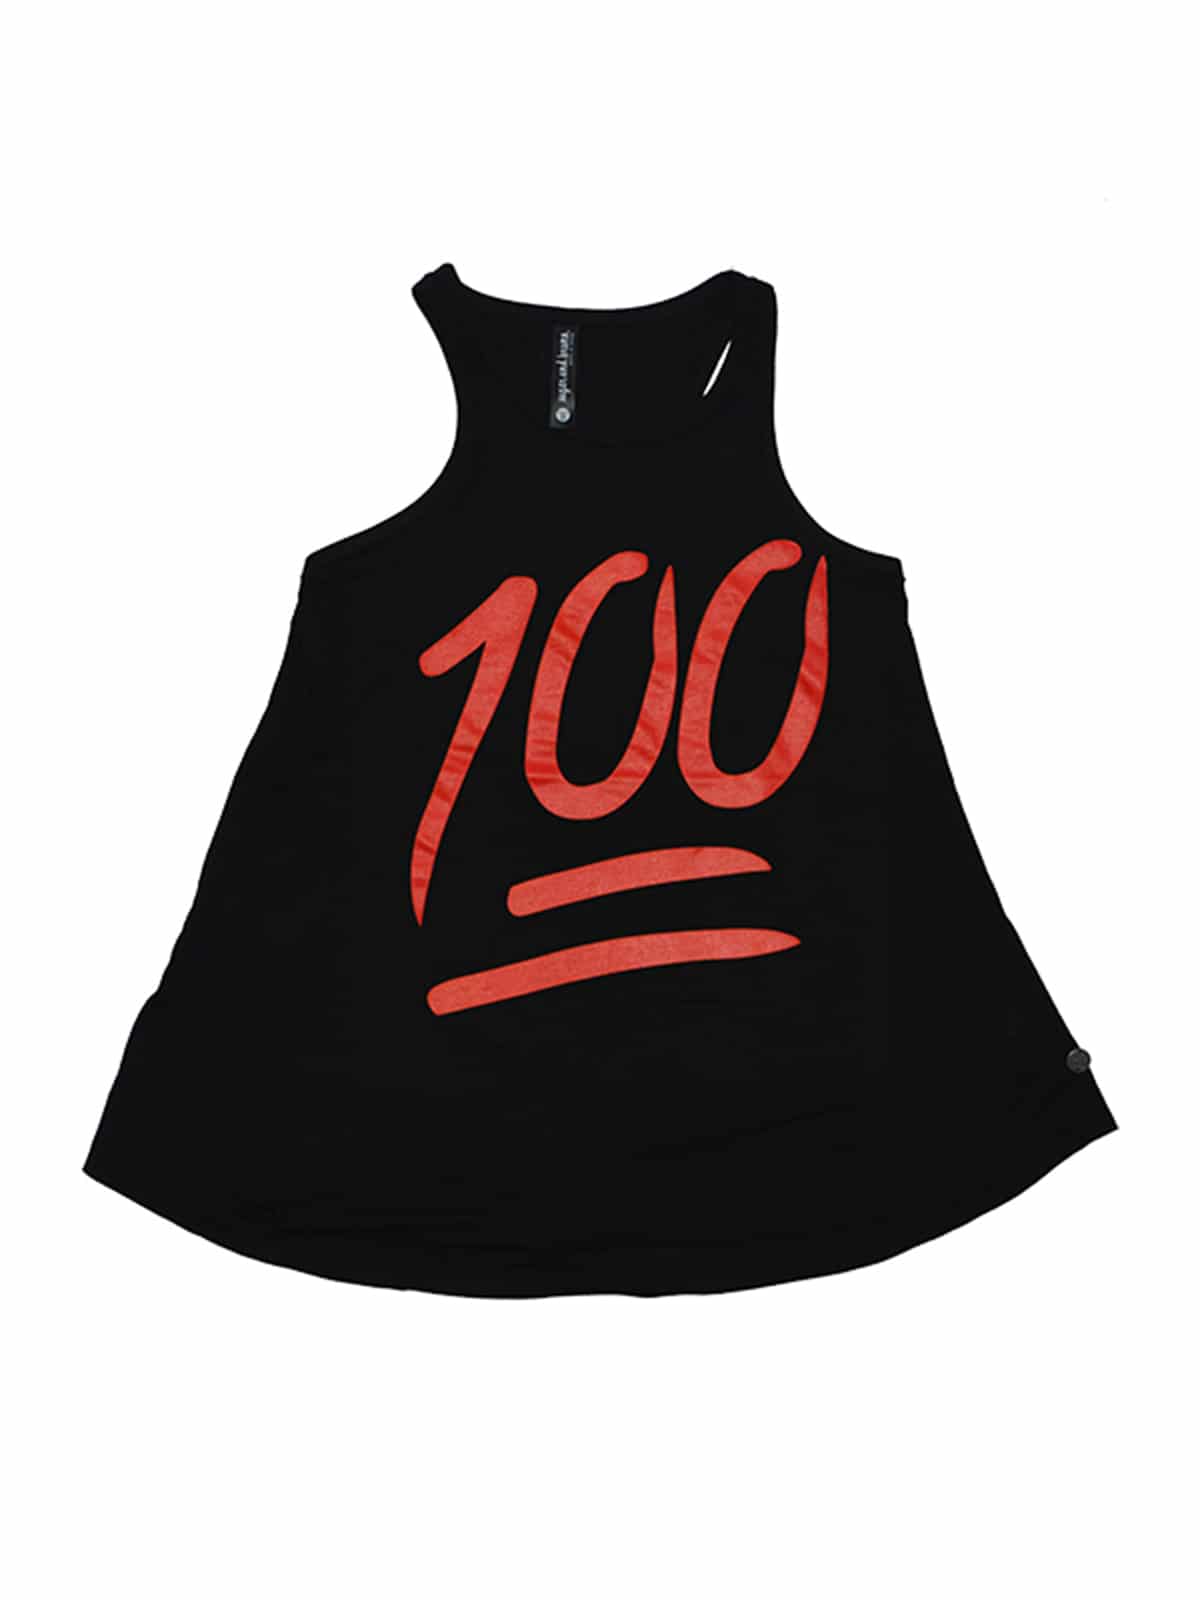 100 Youth Everyday Tank